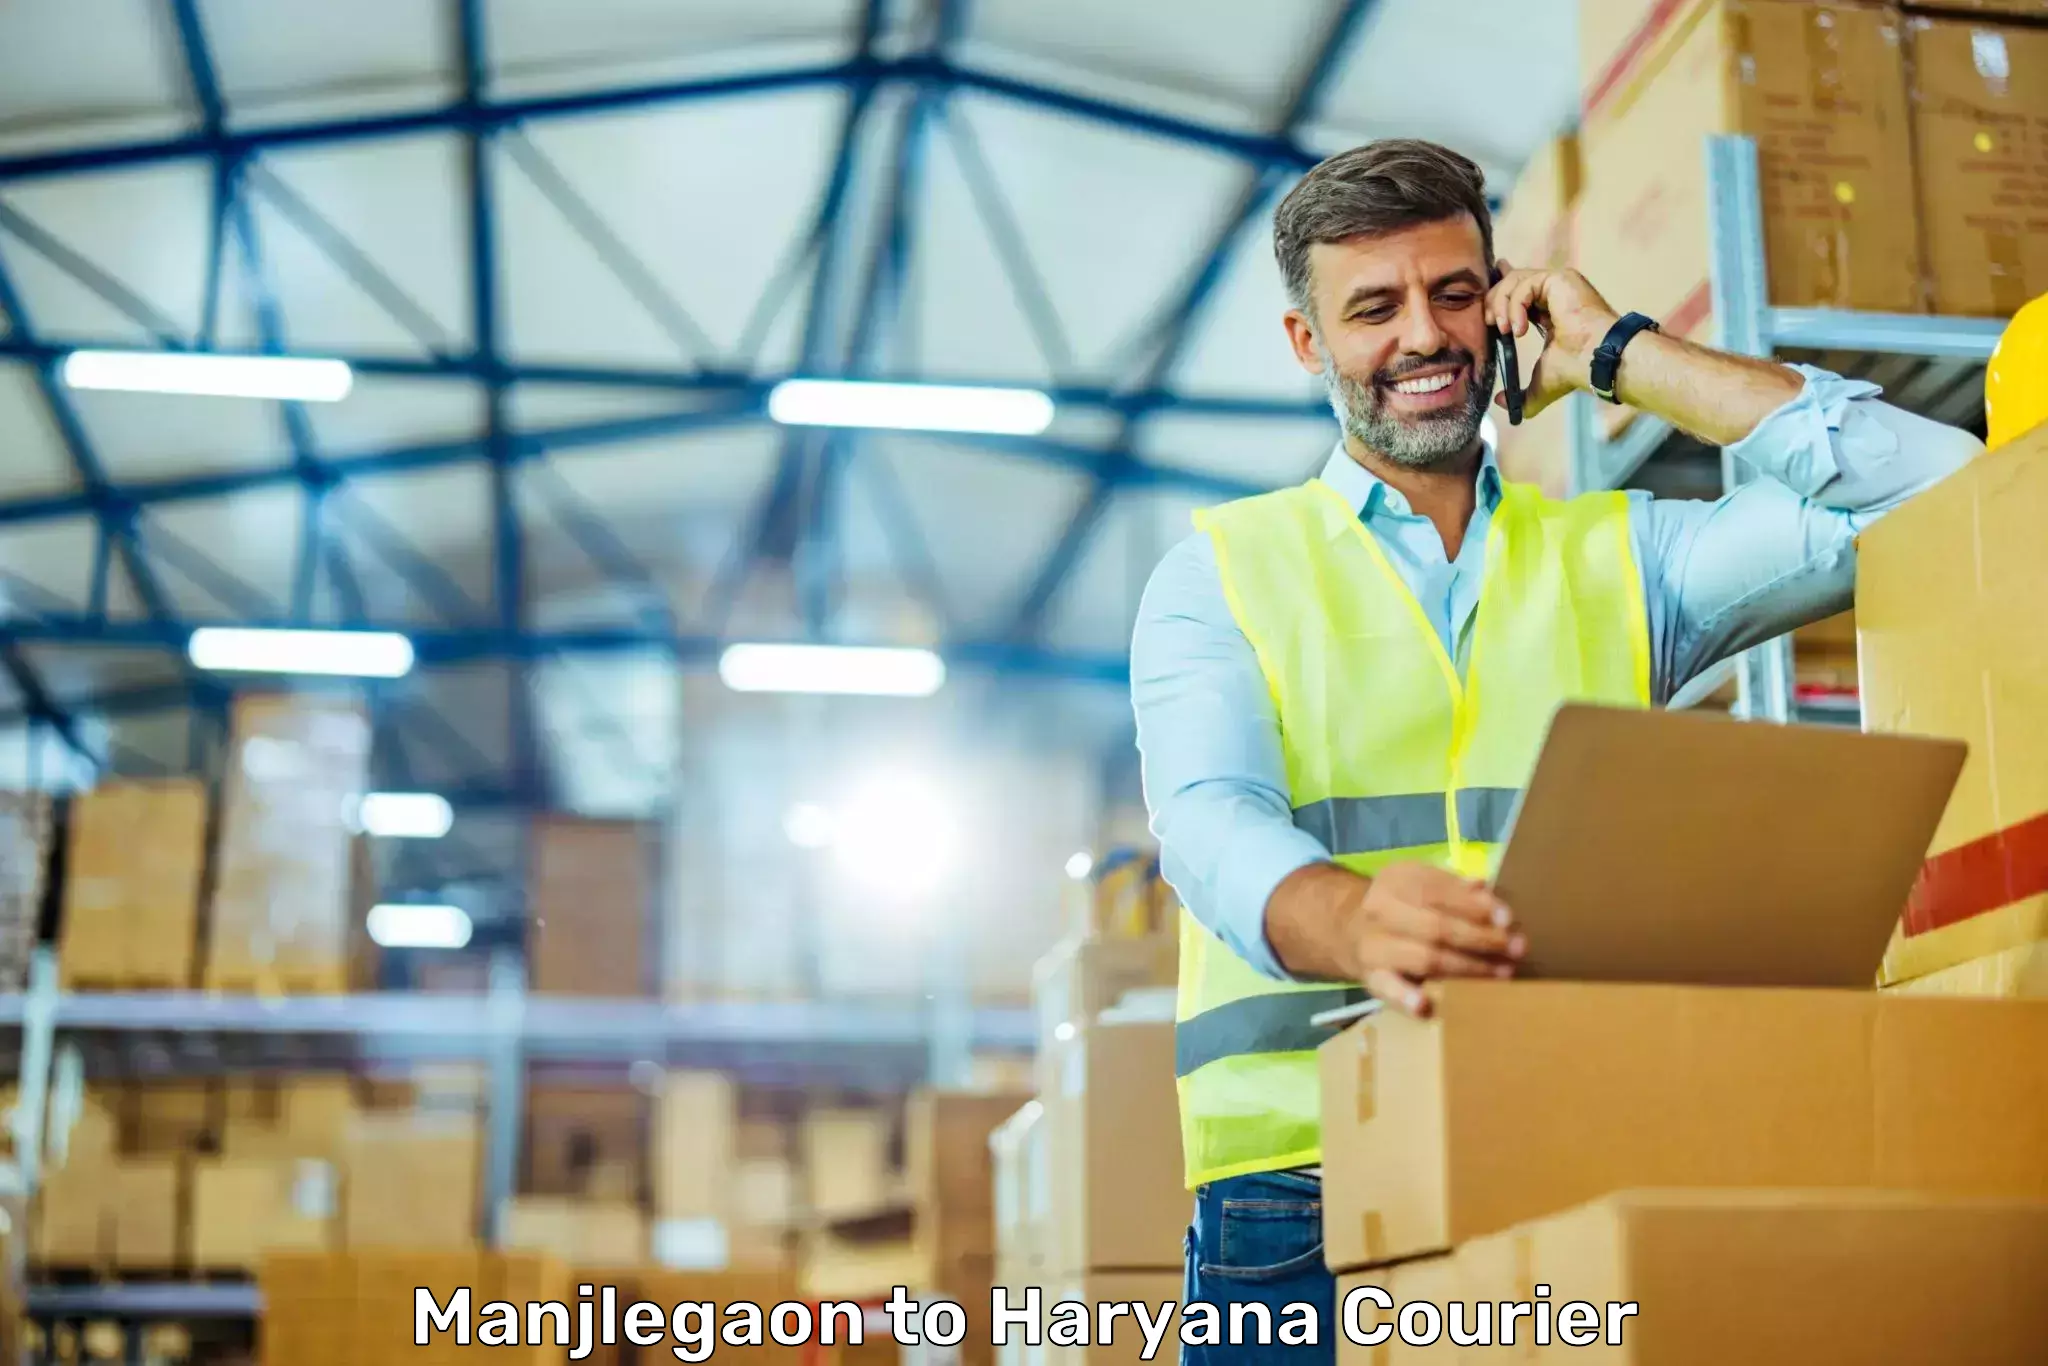 Same-day delivery solutions Manjlegaon to Gurgaon